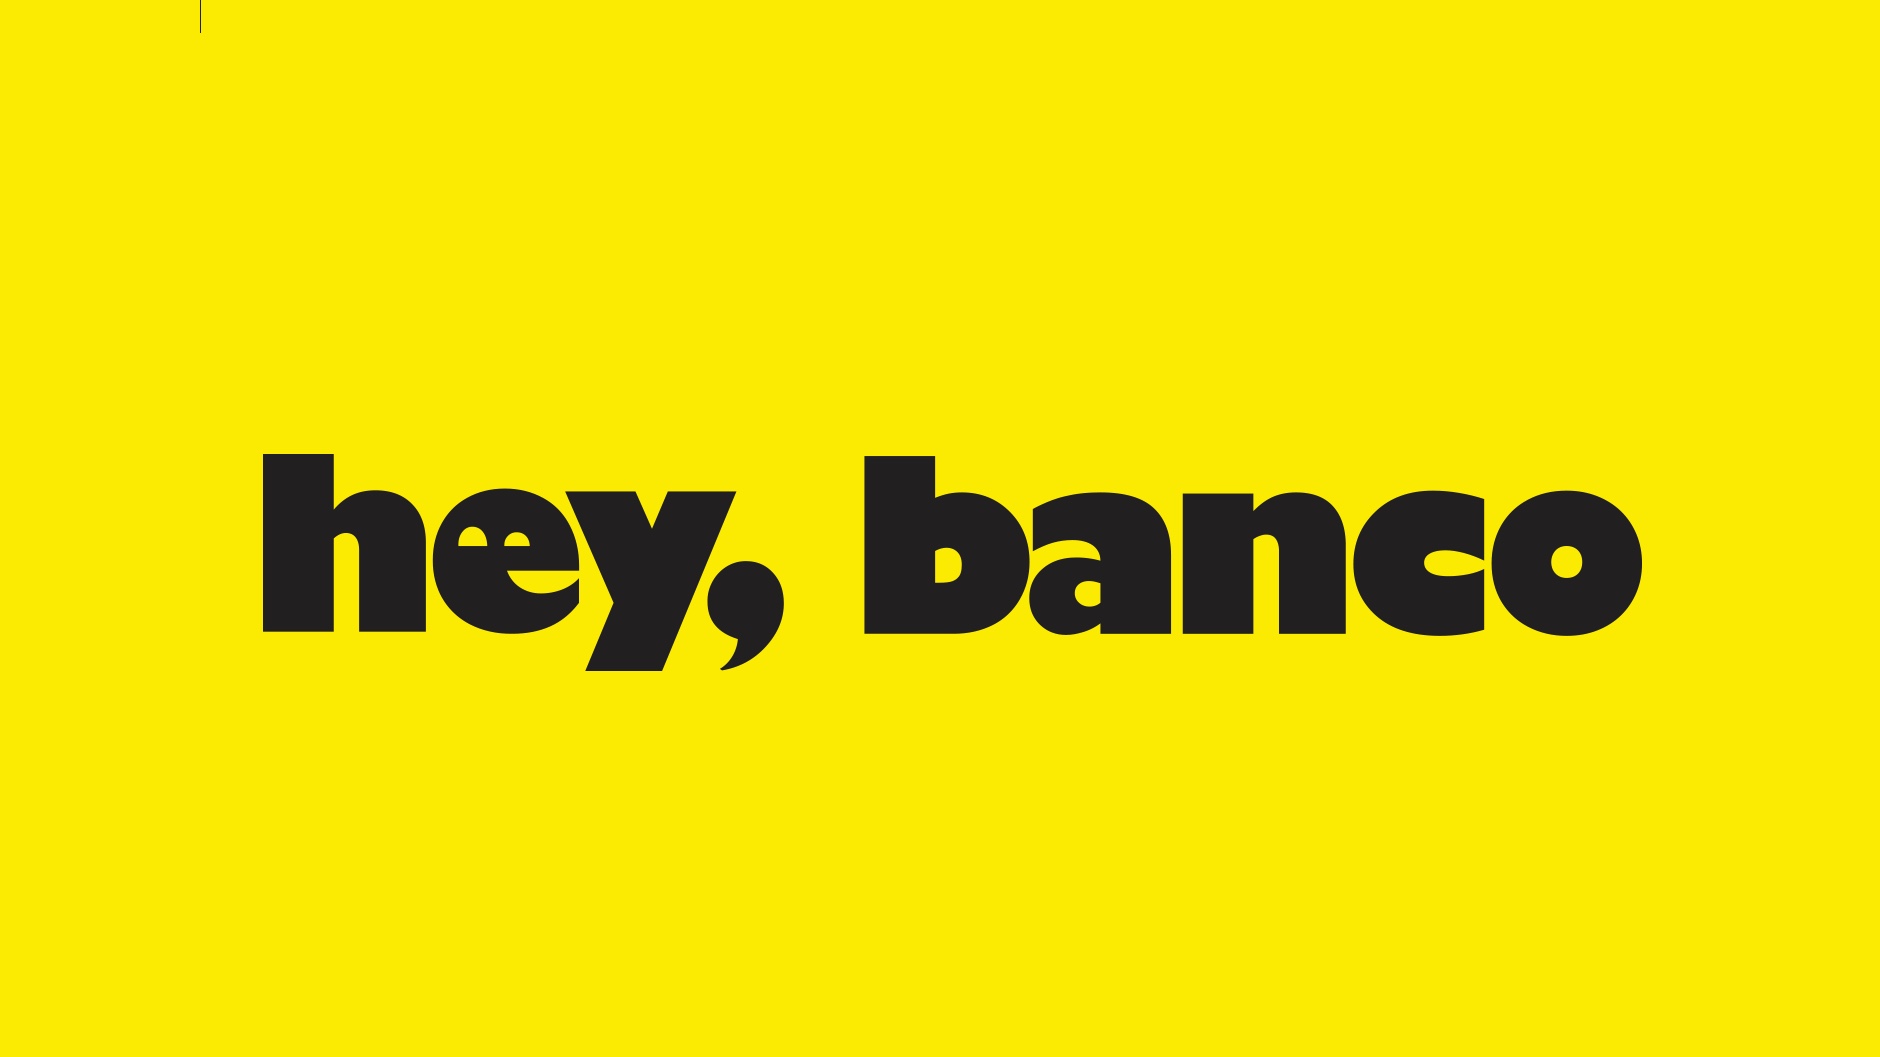 Banregio Enters Digital Banking Arena With Hey Banco Approval